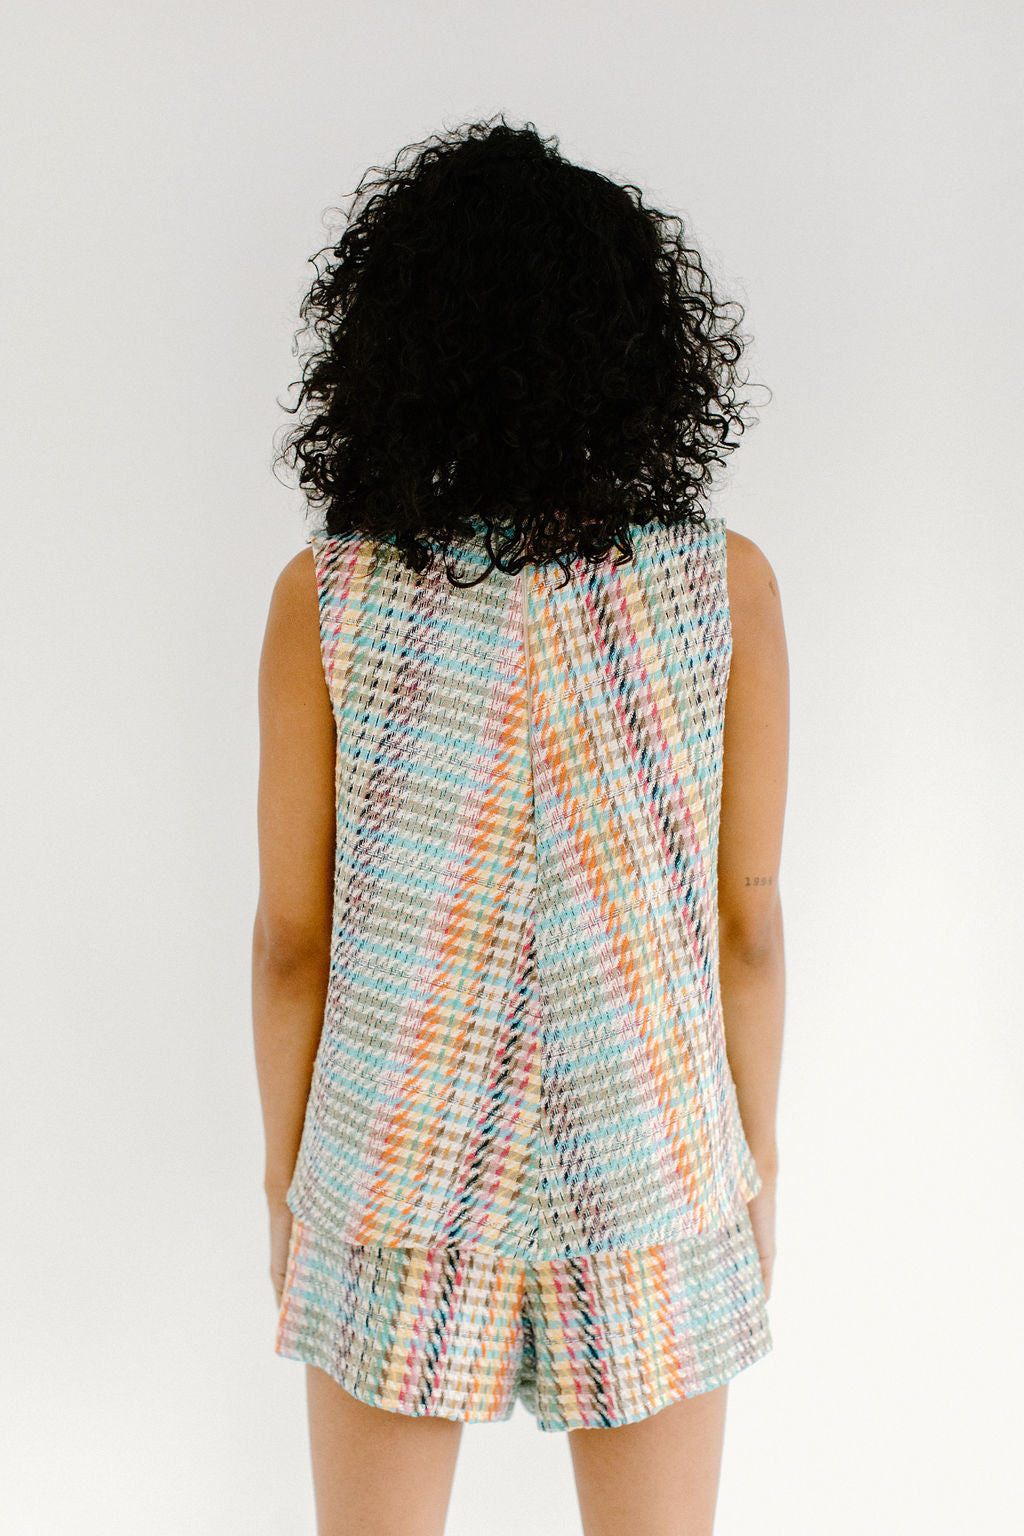 View from behind of a woman with short, black curly hair wearing a tank top and shorts set in a colorful plaid pattern.